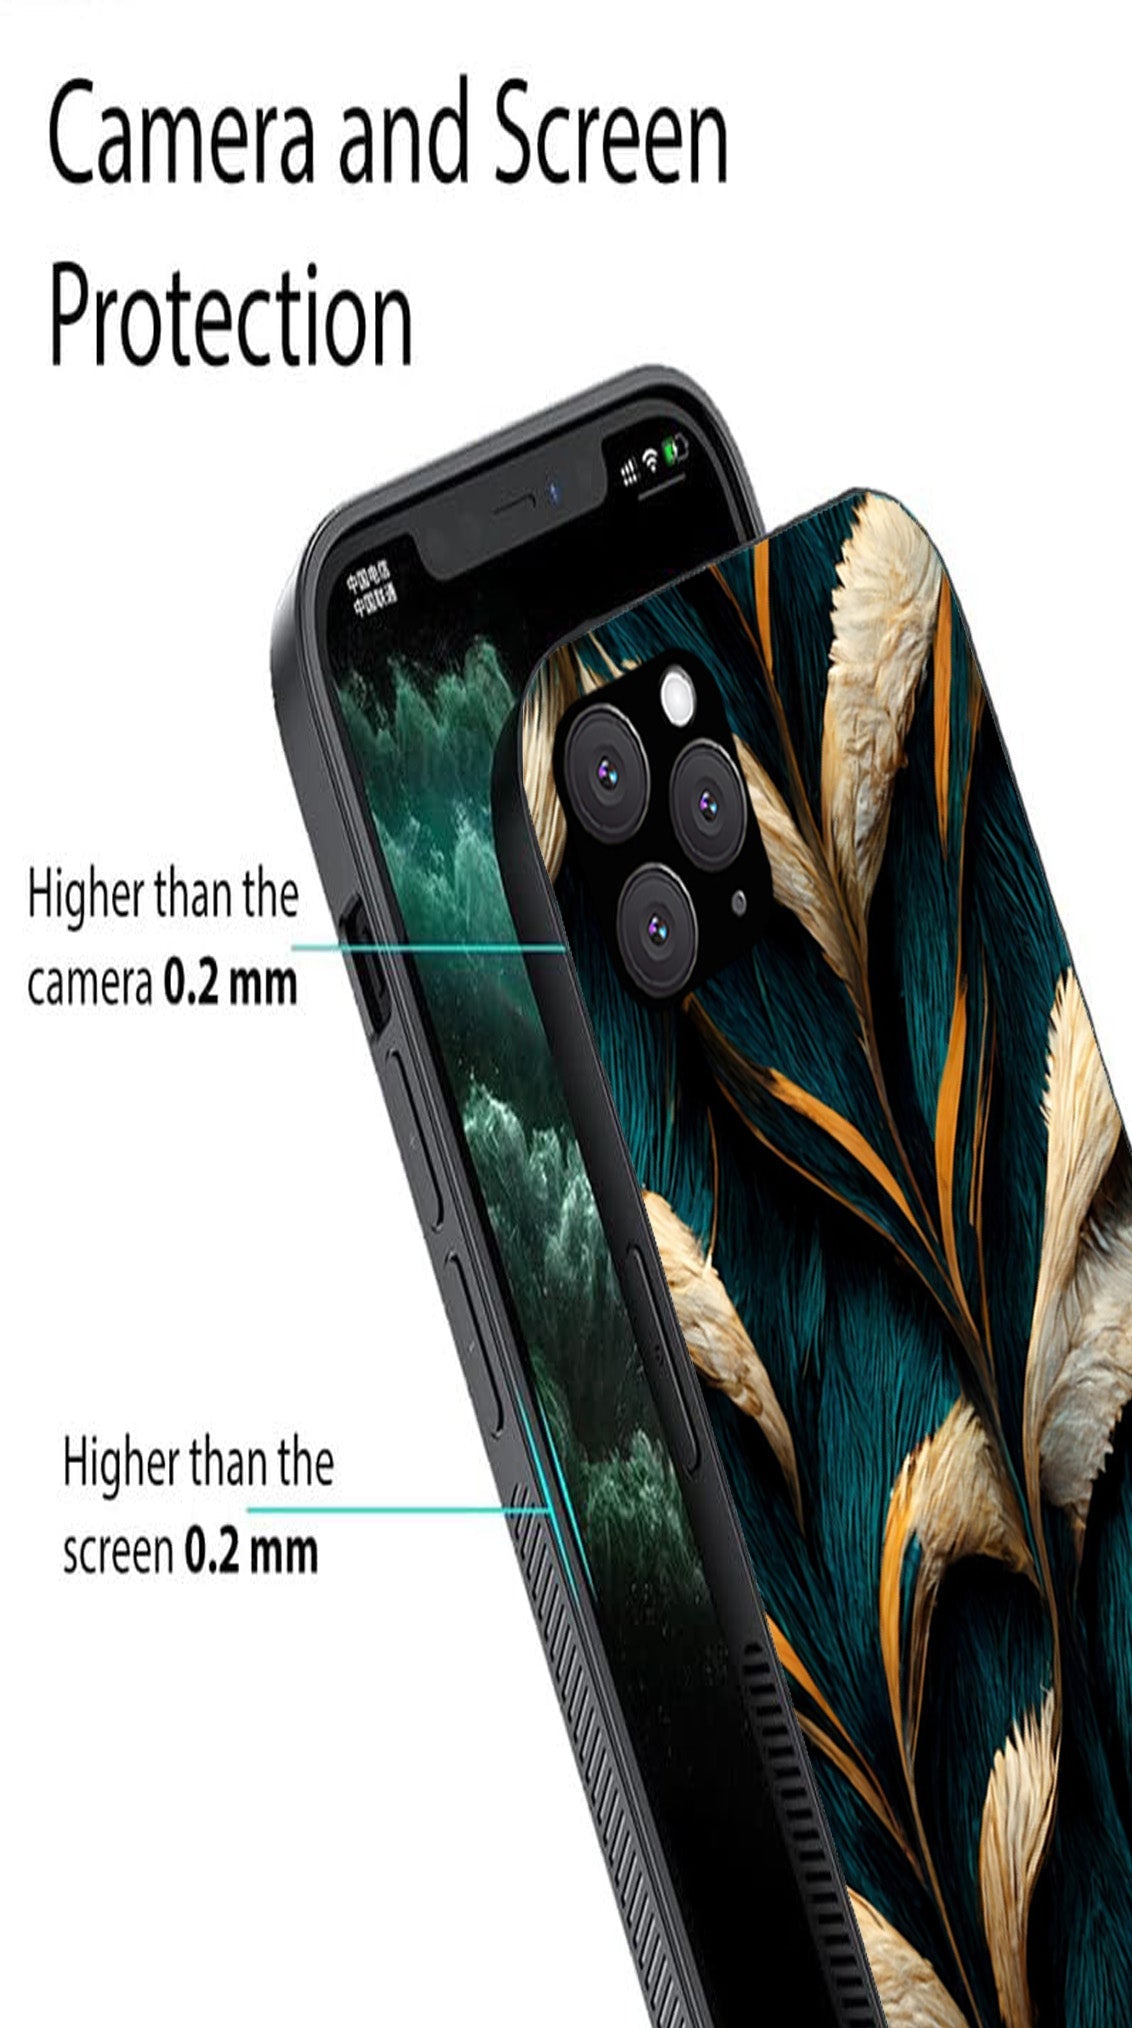 Feathers Metal Mobile Case for iPhone 11 Pro Max